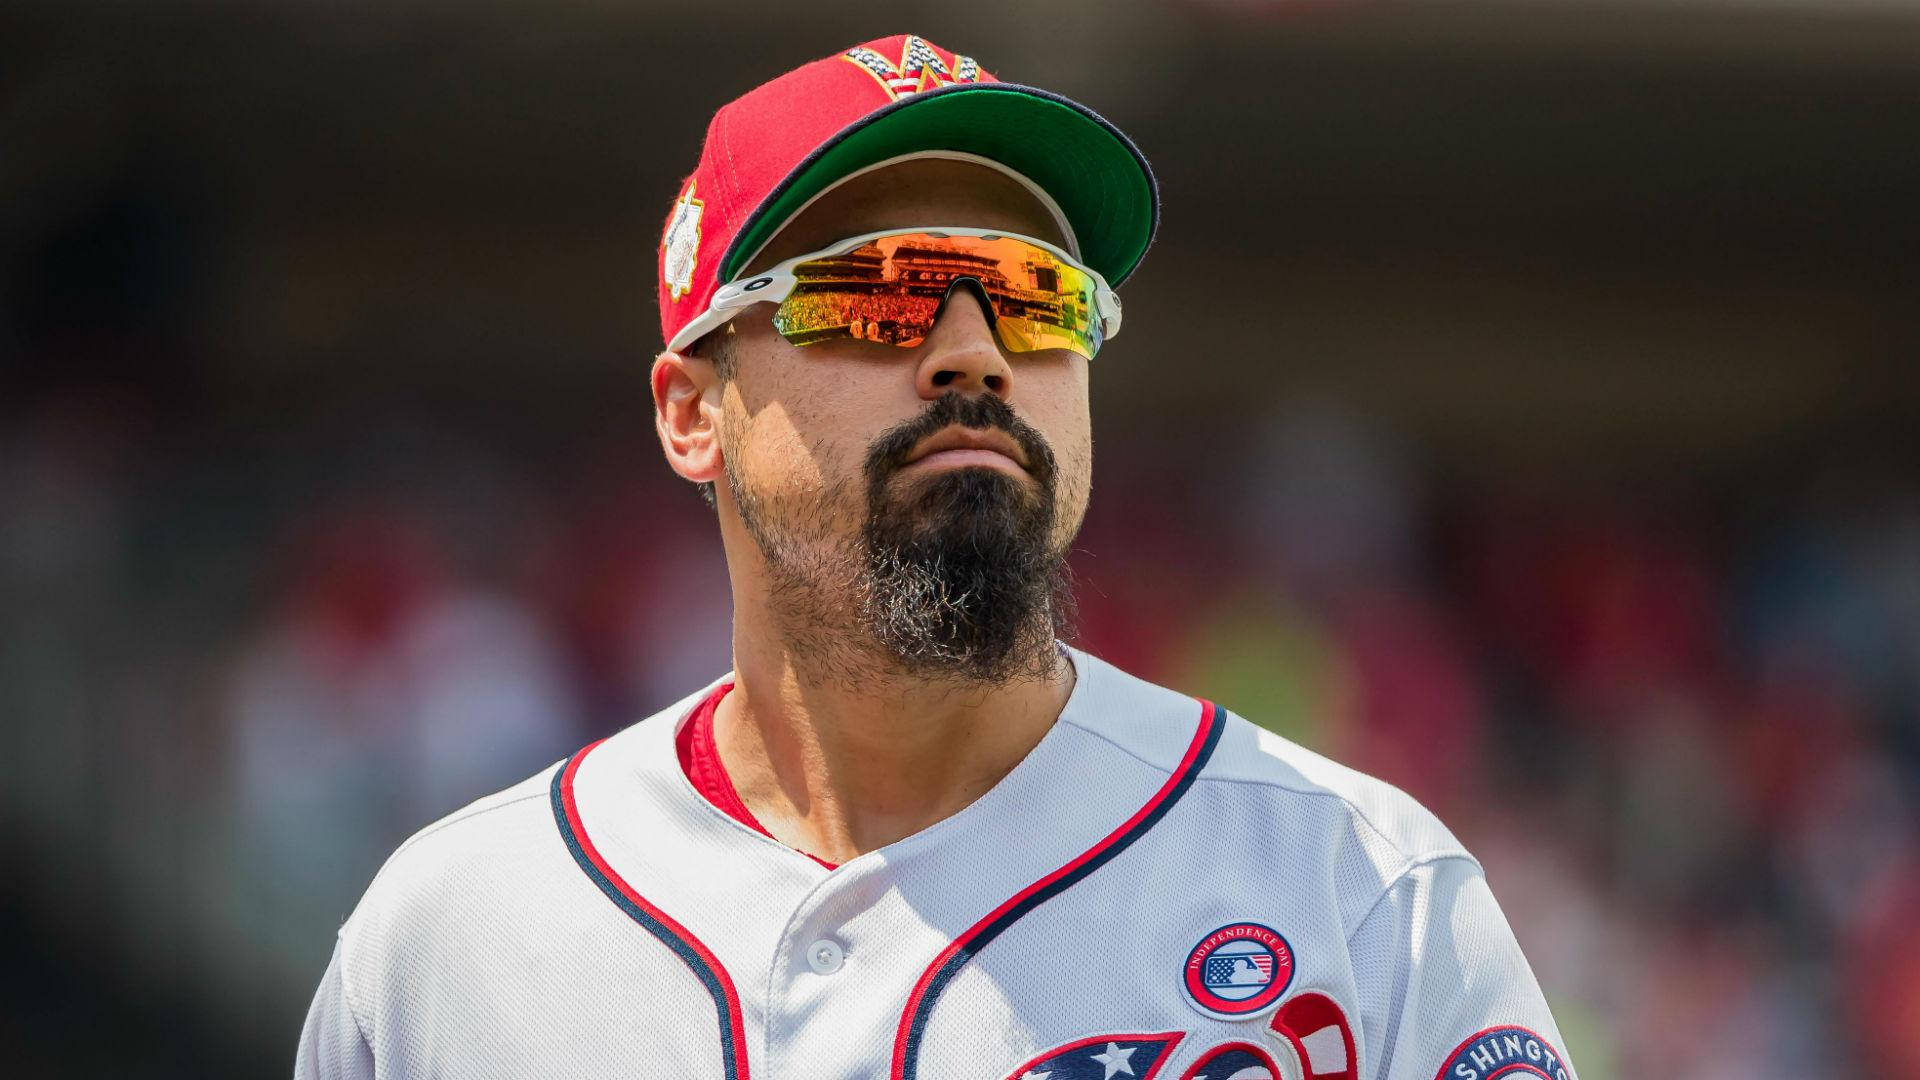 Anthony Rendon In Colorful Shades Background